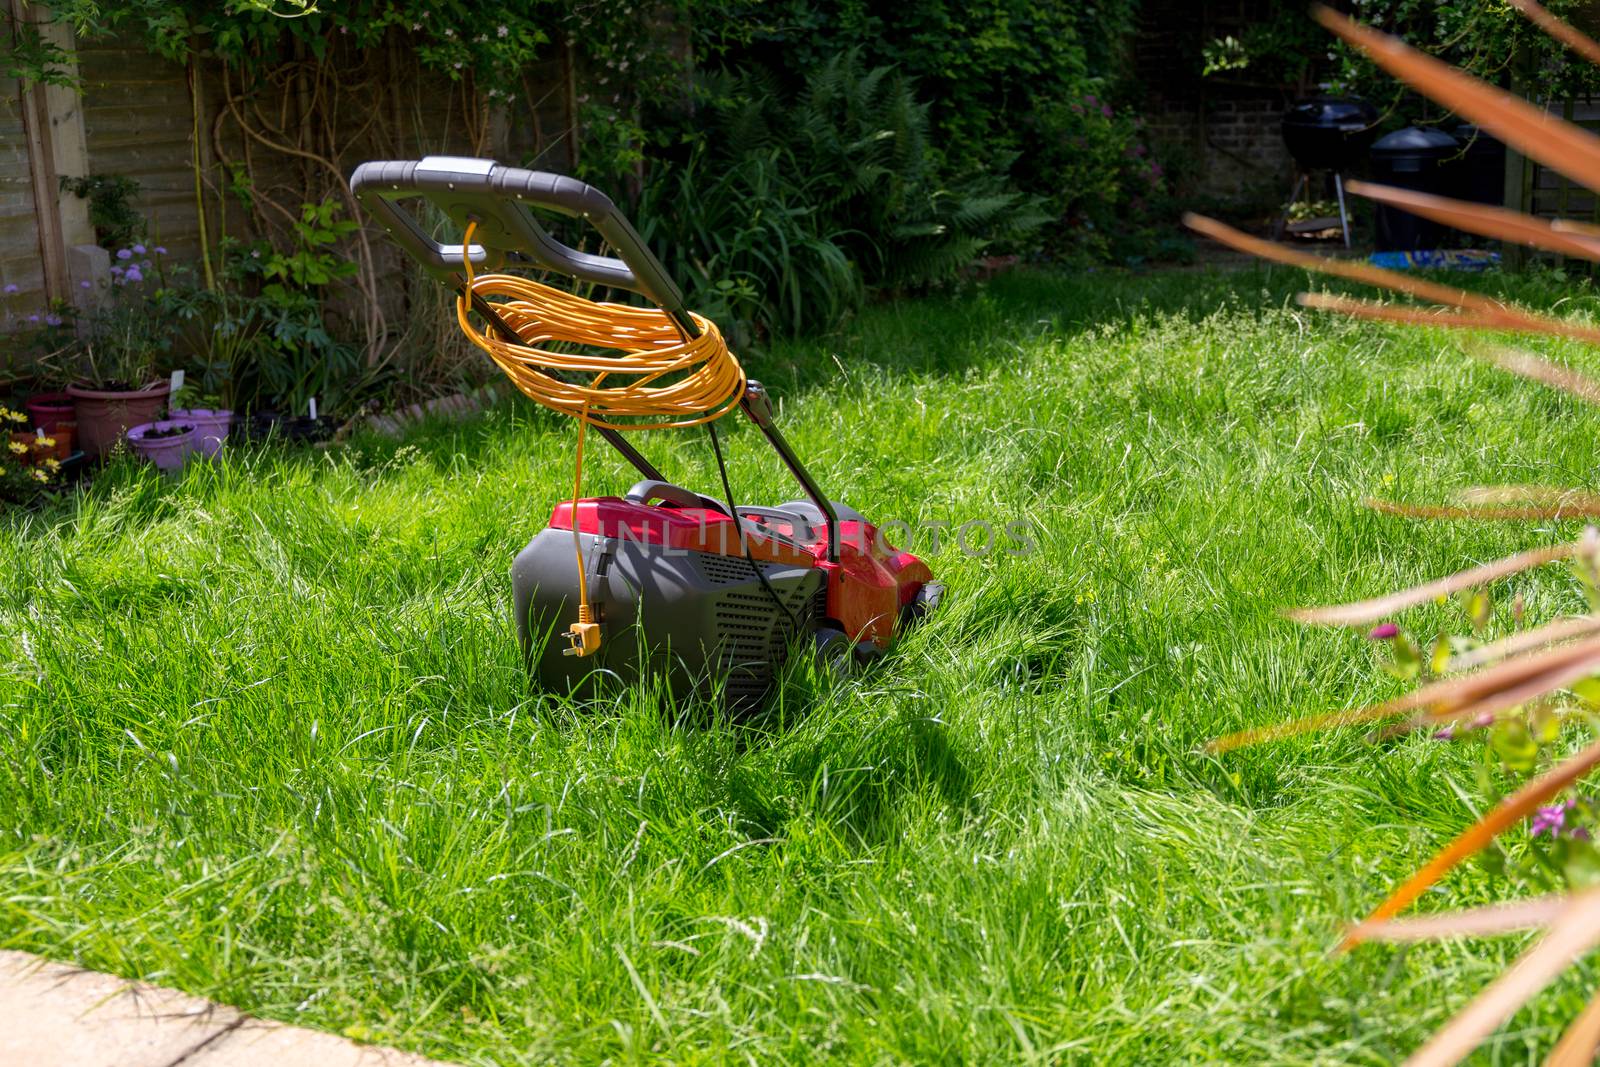 Lawnmower on a lawn of long grass by magicbones